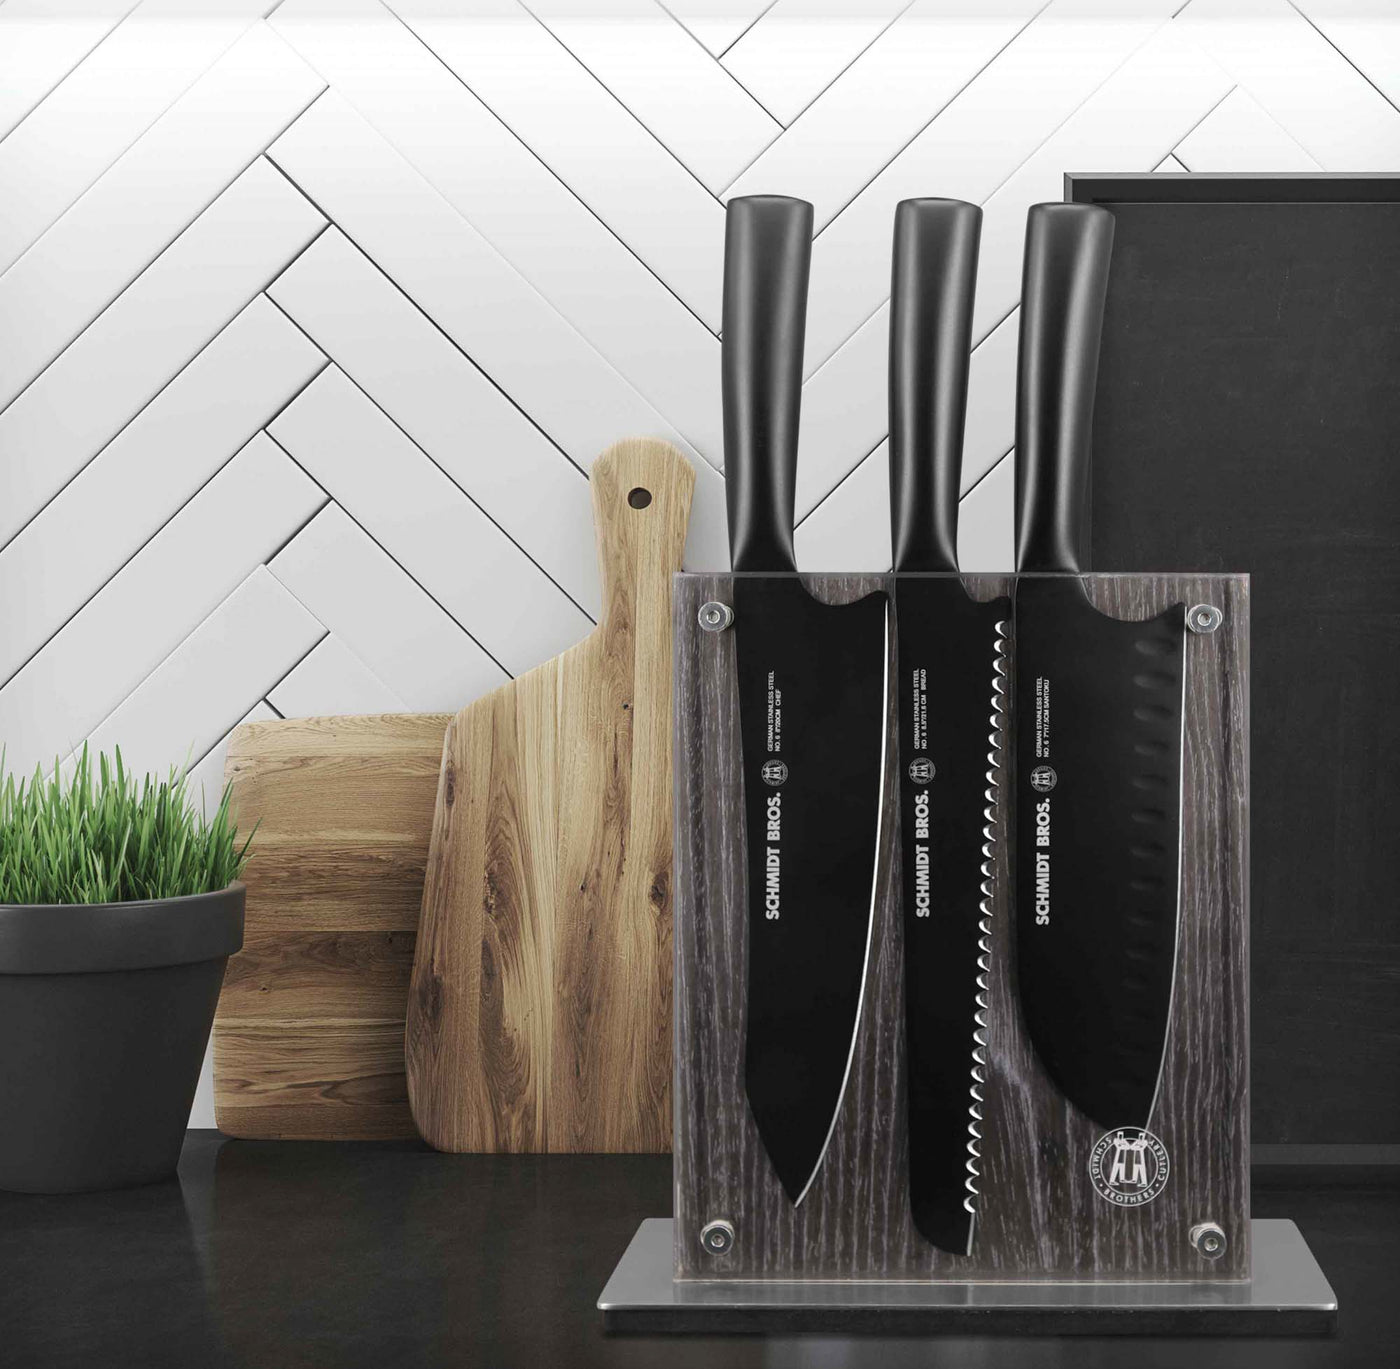  Schmidt Brothers-Cutlery Stone Series 14-Piece Kitchen Knife Set,  High-Carbon German Stainless Steel Cutlery, Two-stage Knife Sharpener and  Clear Acrylic Magnetic Knife Block: Home & Kitchen